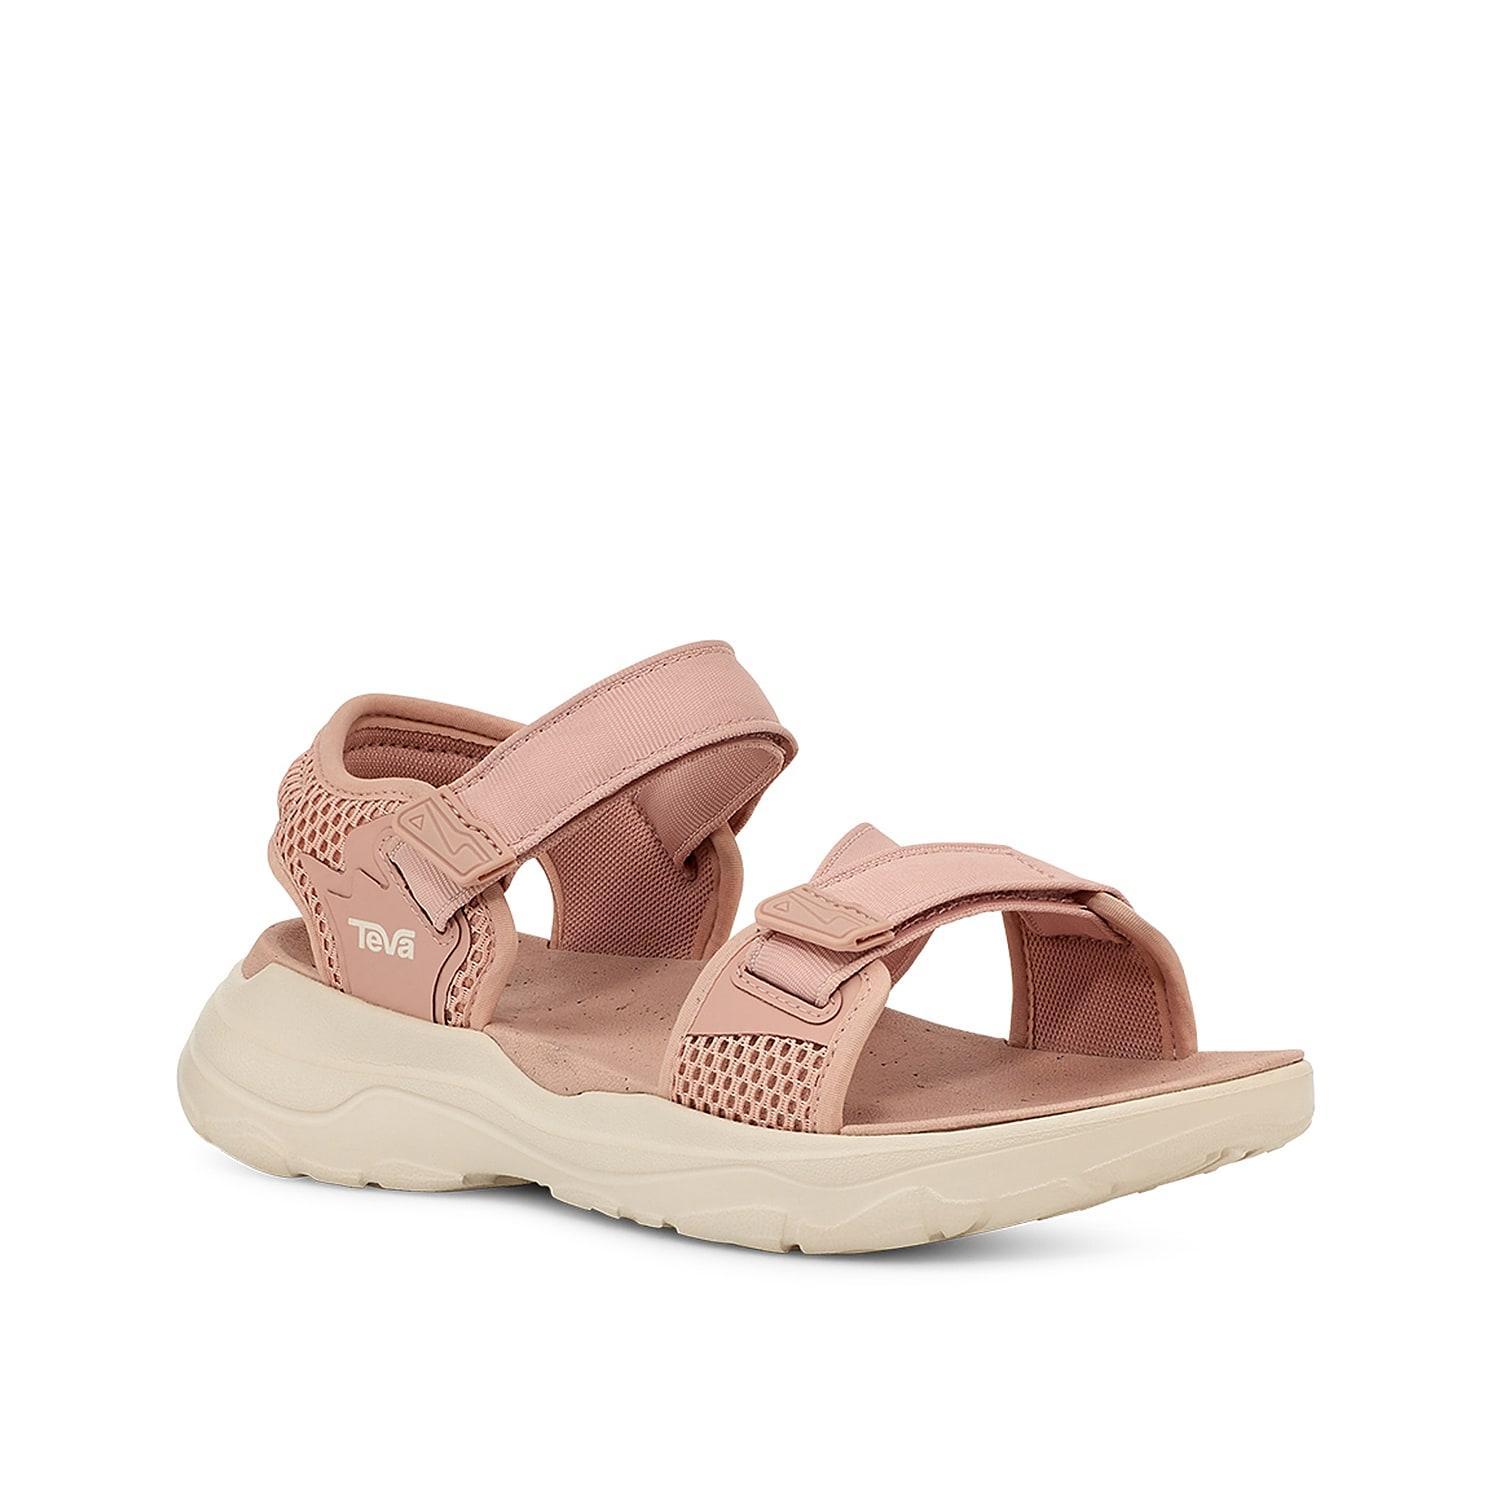 Teva Zymic Sandals by Teva at Free People Product Image